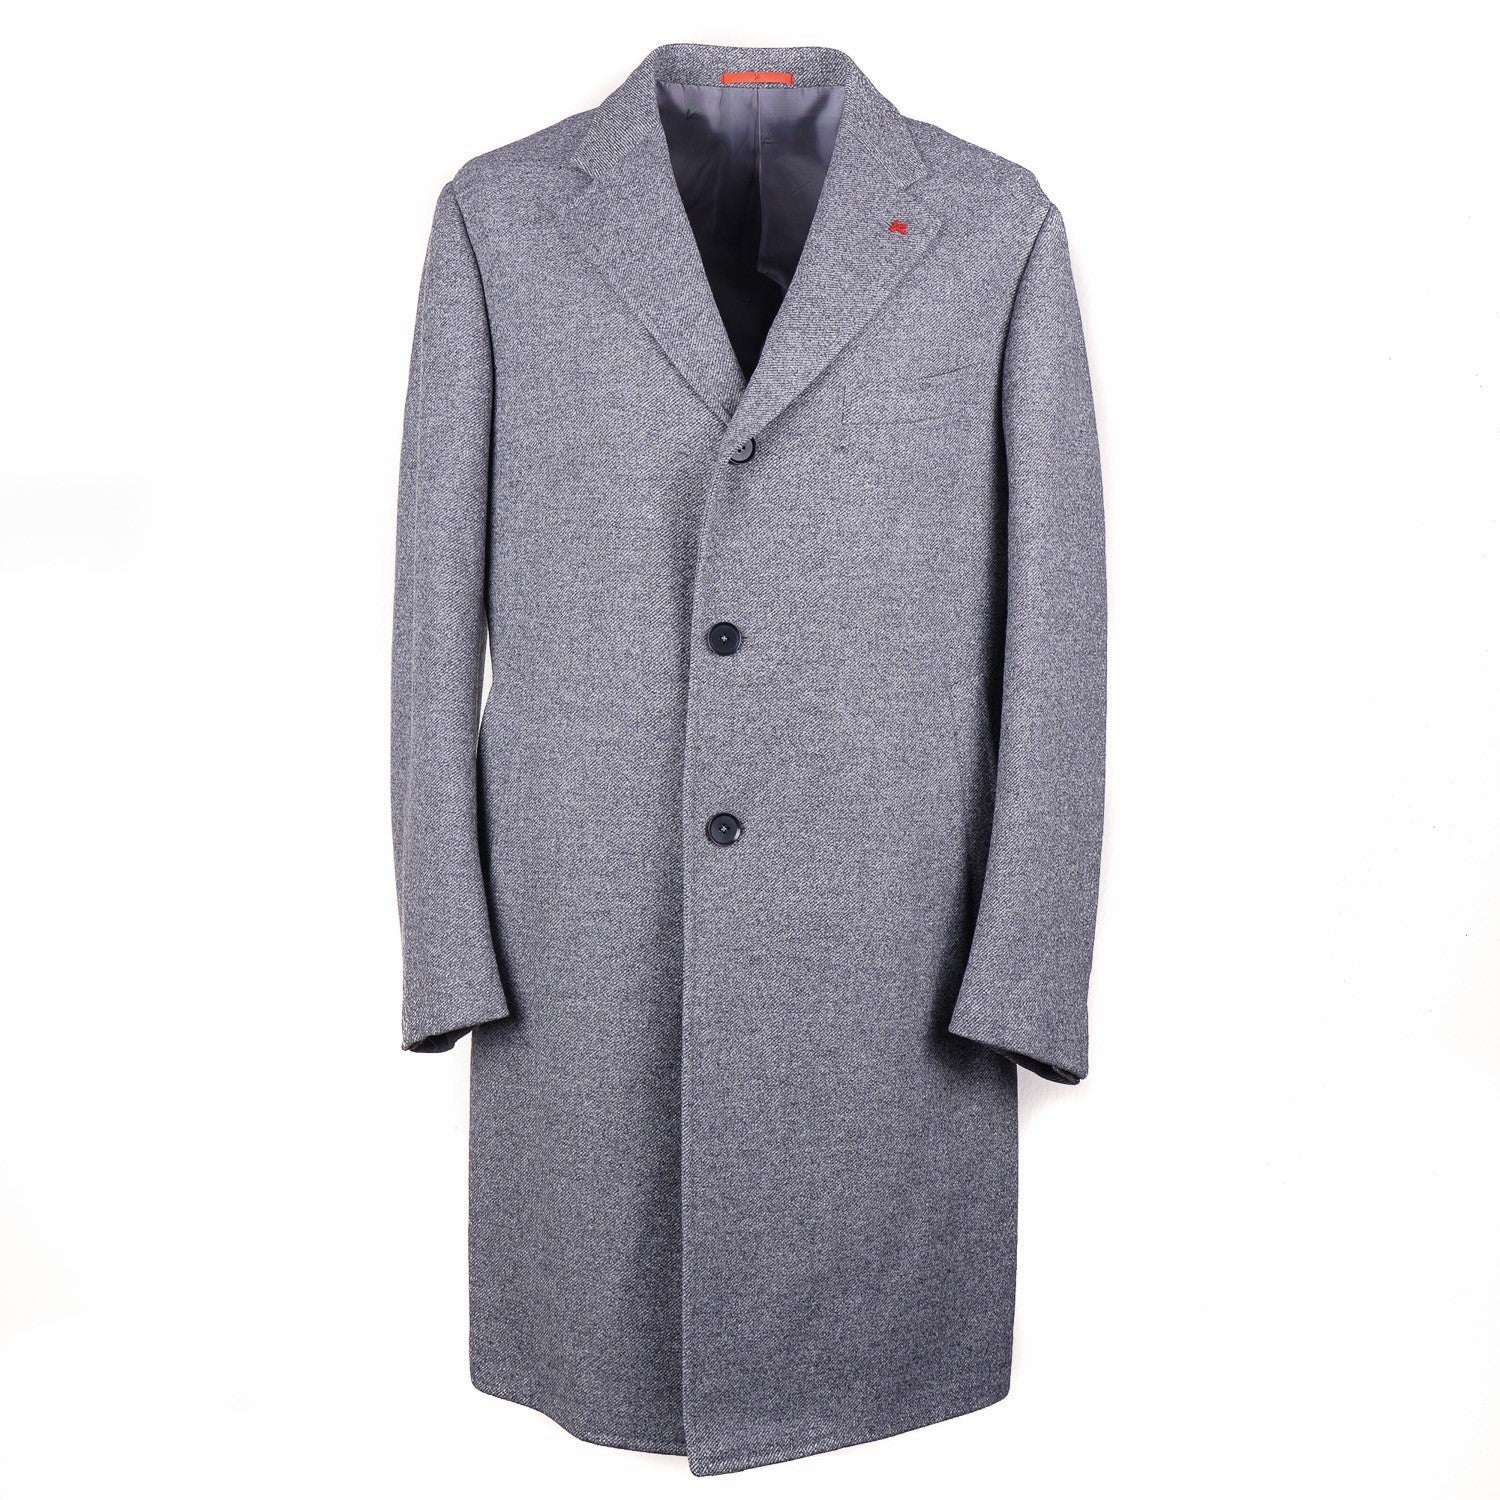 Isaia Gray Wool and Cashmere Overcoat - Top Shelf Apparel